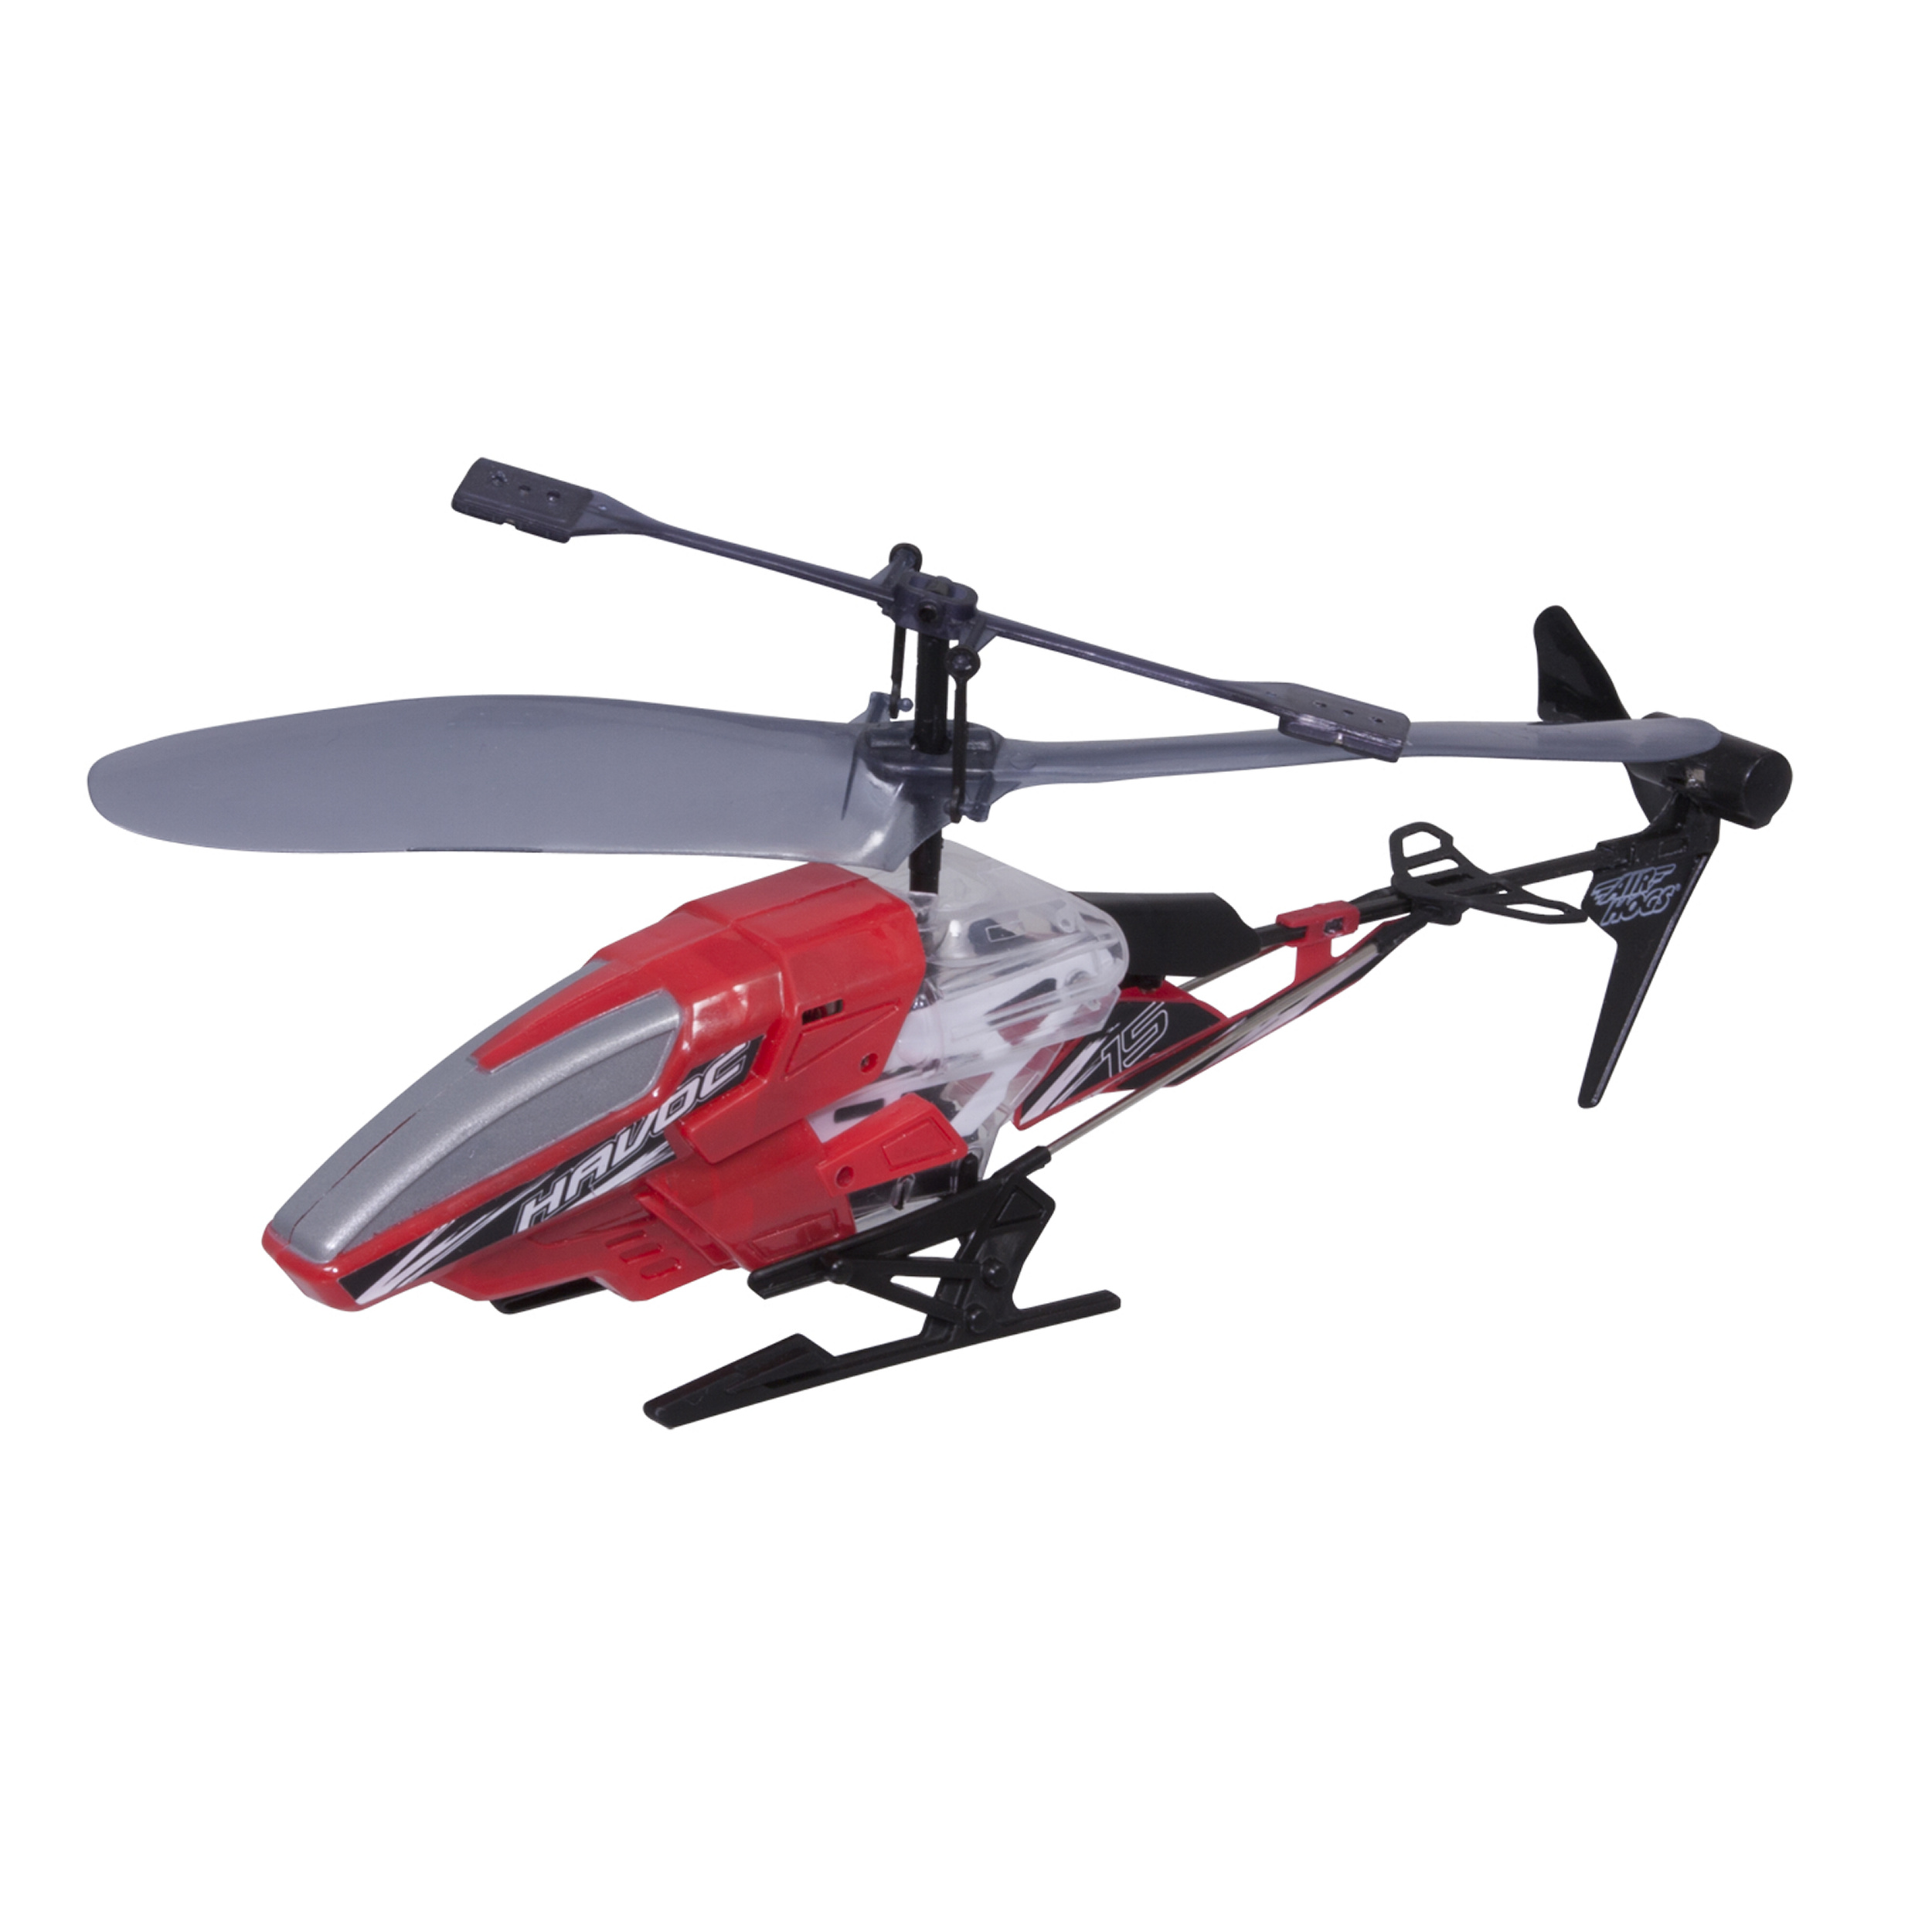 Air Hogs RC Havoc Helicopter- Remote Control Toy Helicopter - image 1 of 3